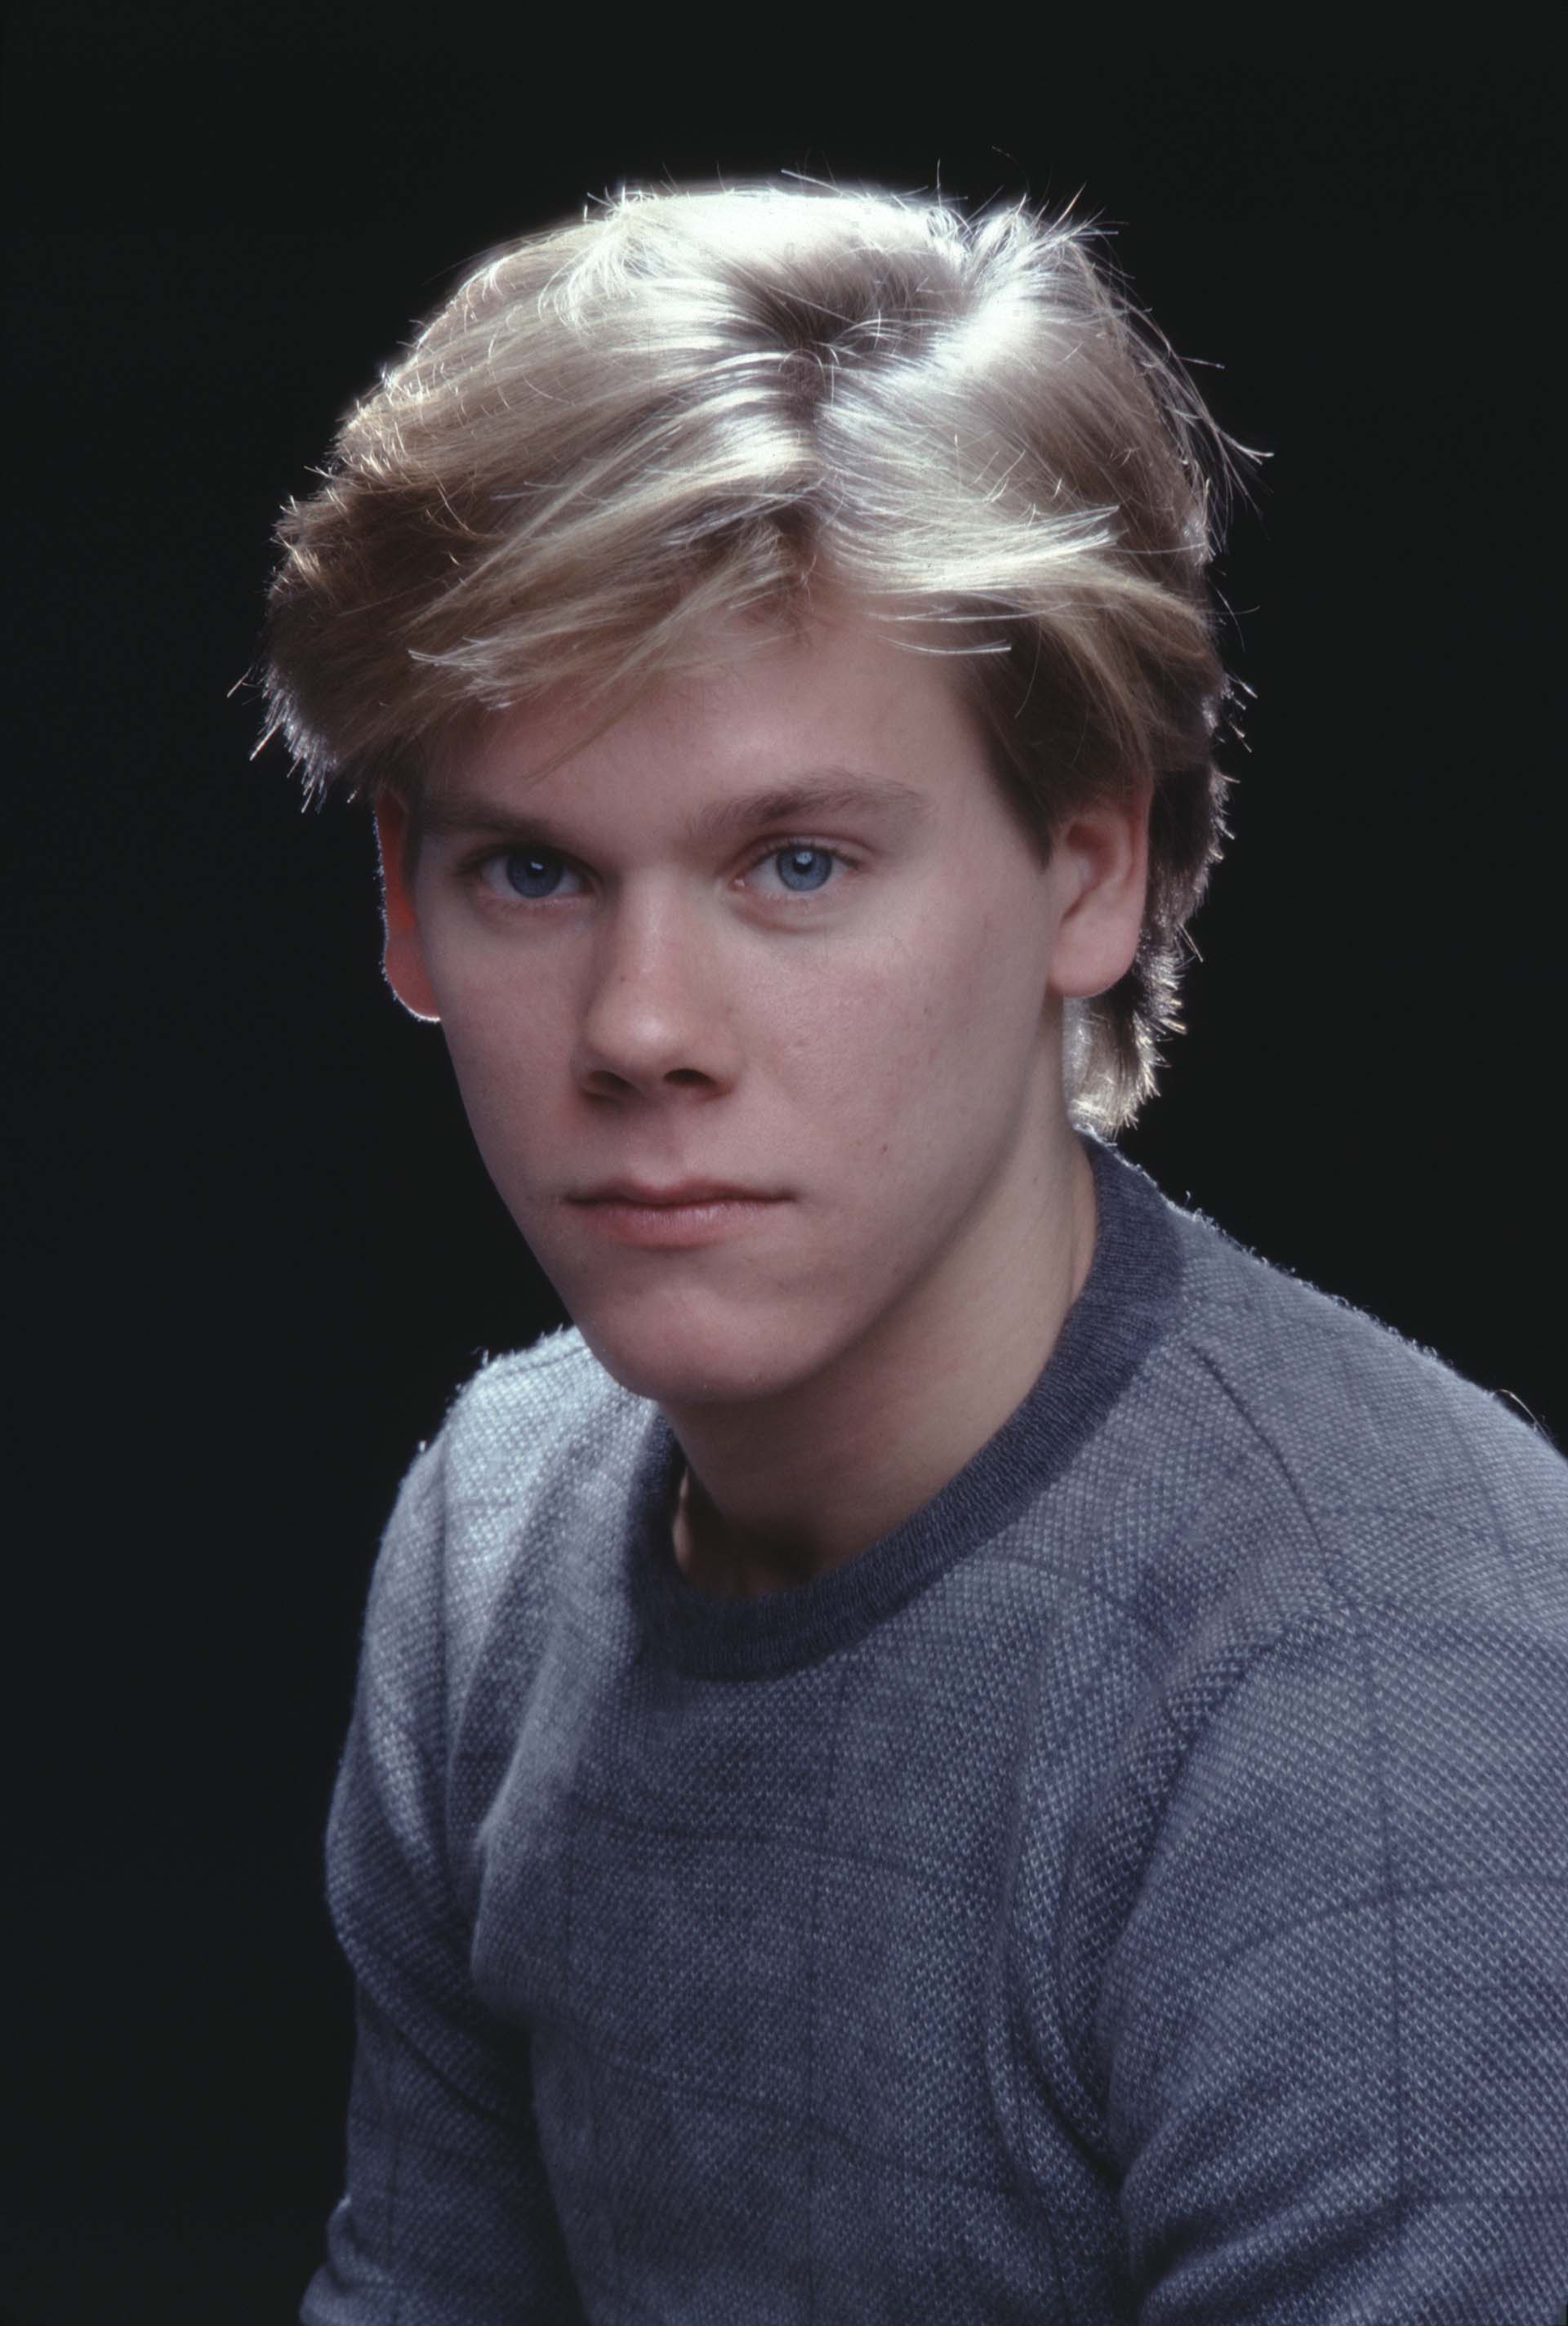 Kevin Bacon, en 1980 (Getty Images)